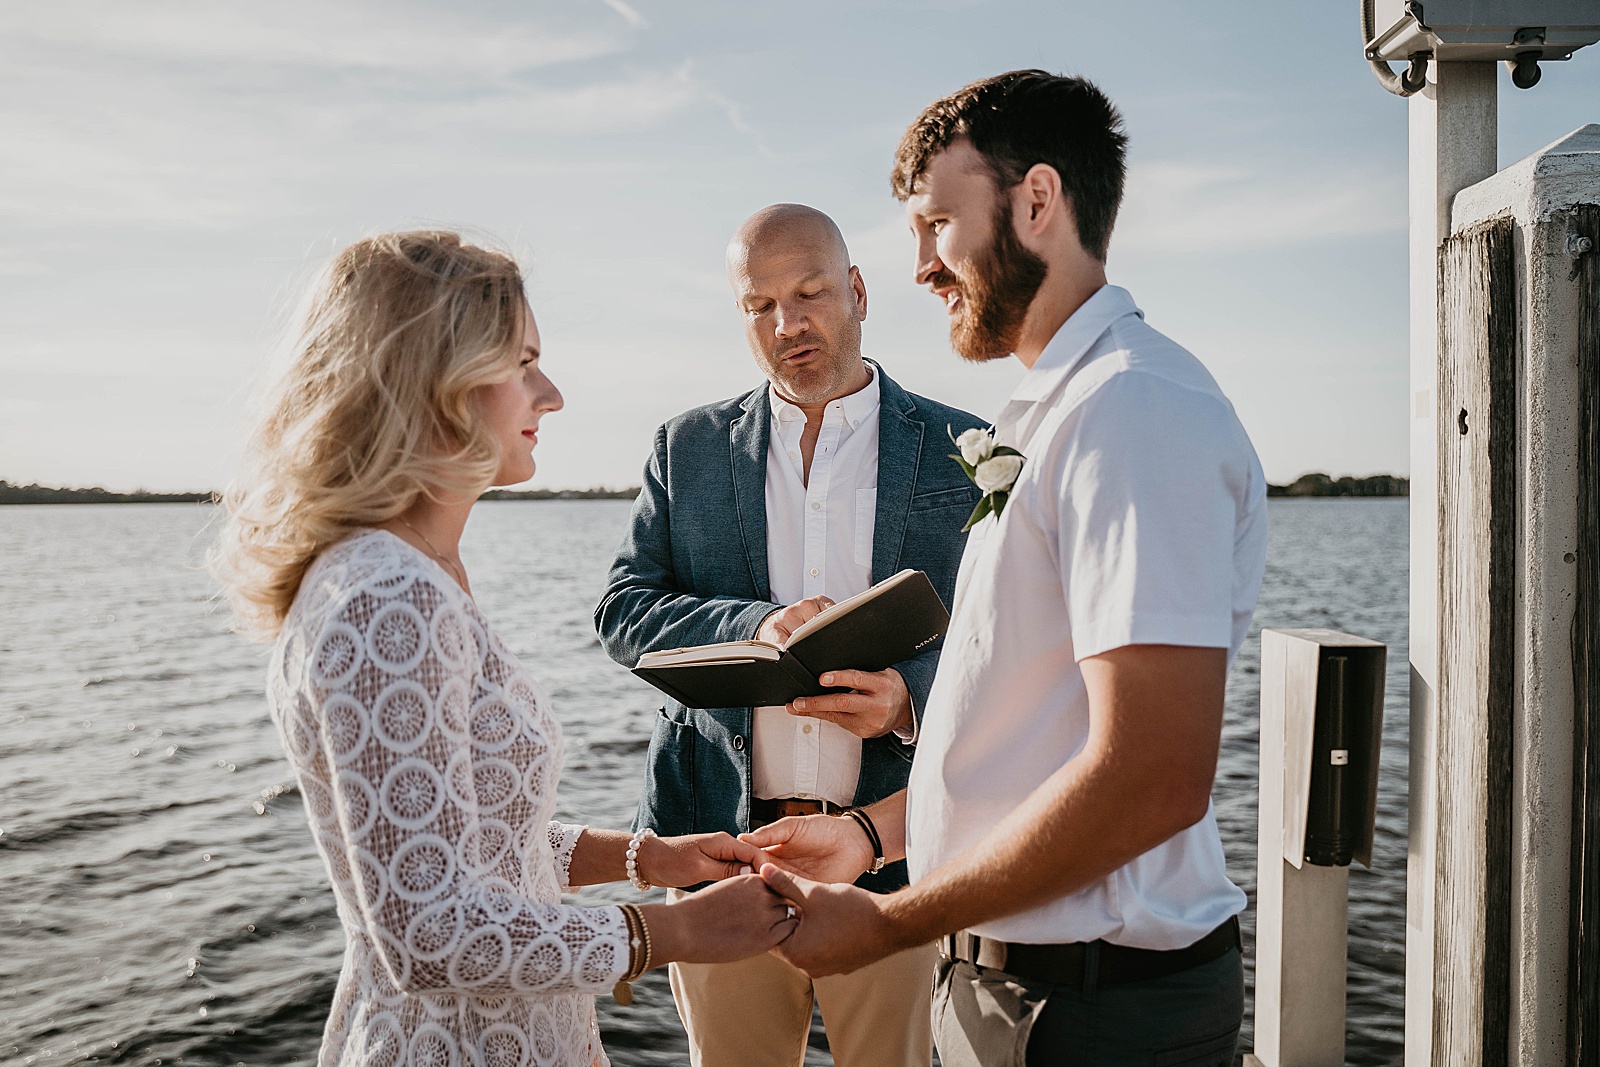 South Florida Waterfront Elopement ceremony vows captured by South Florida Elopement Photographer, Krystal Capone Photography